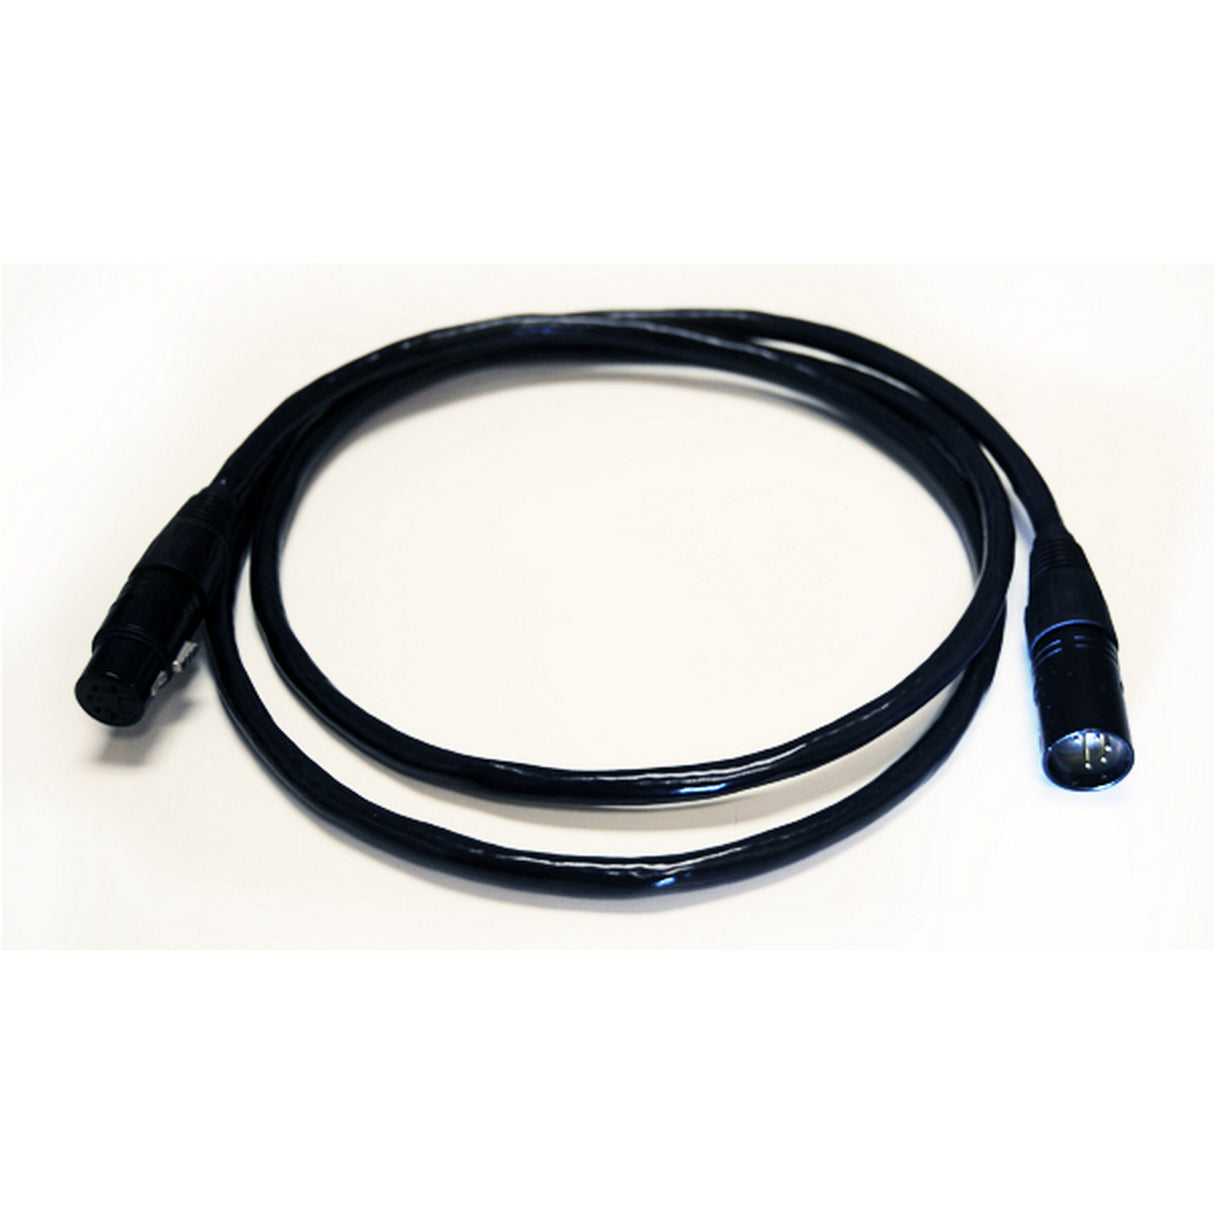 Whirlwind DMX50 DMX 5-Pin XLRF to XLRM Cable, 50-Feet